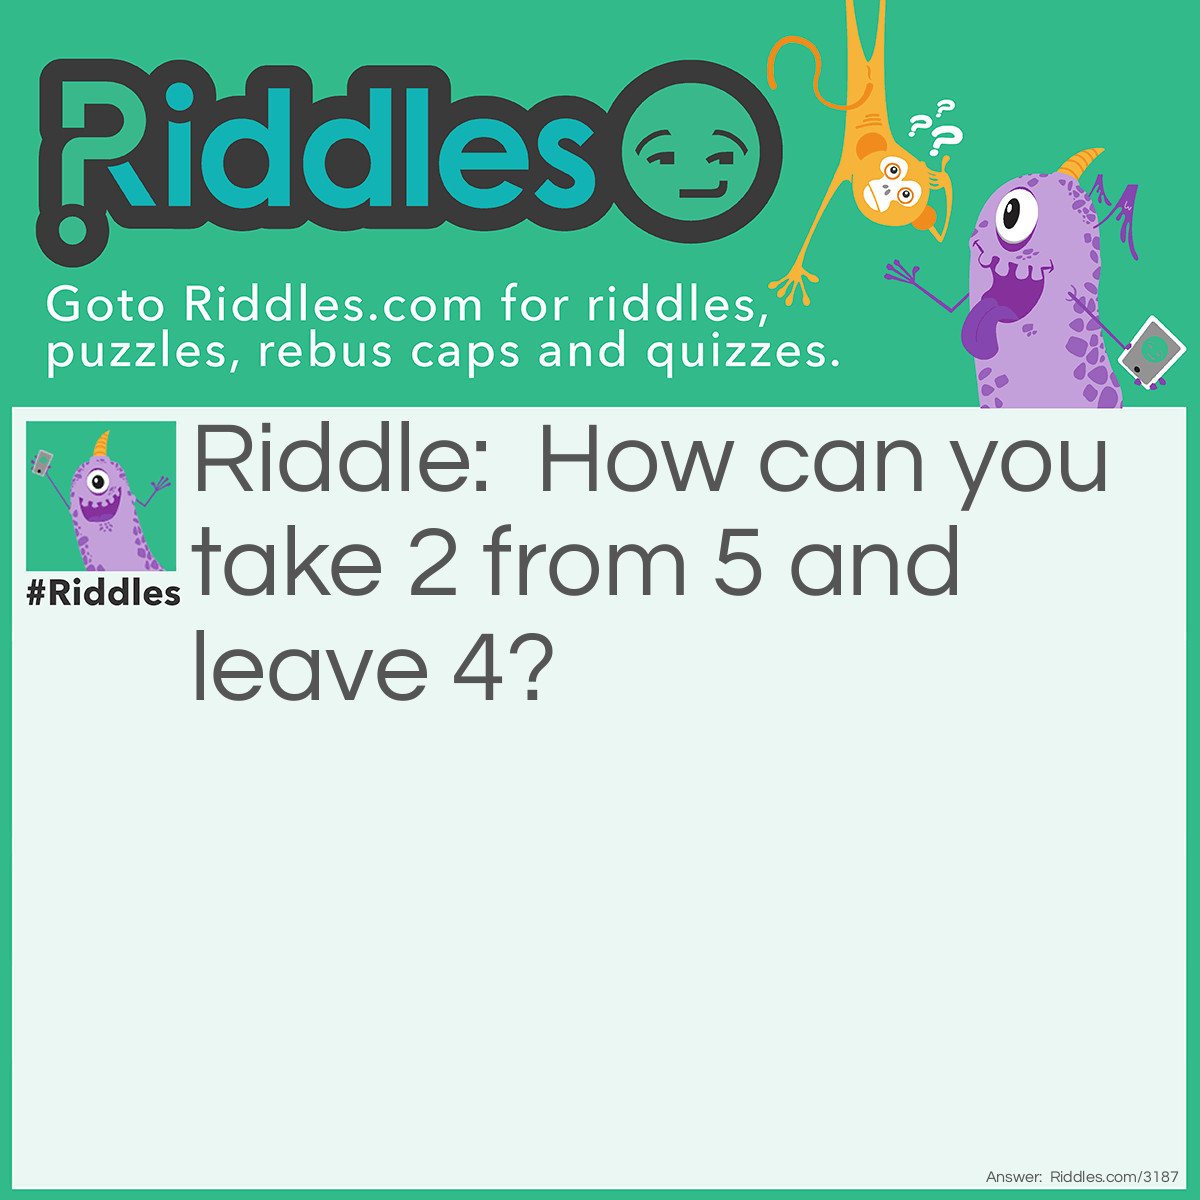 Riddle: How can you take 2 from 5 and leave 4? Answer: F  I V  E
Remove the 2 letters F and E from five and you have IV.